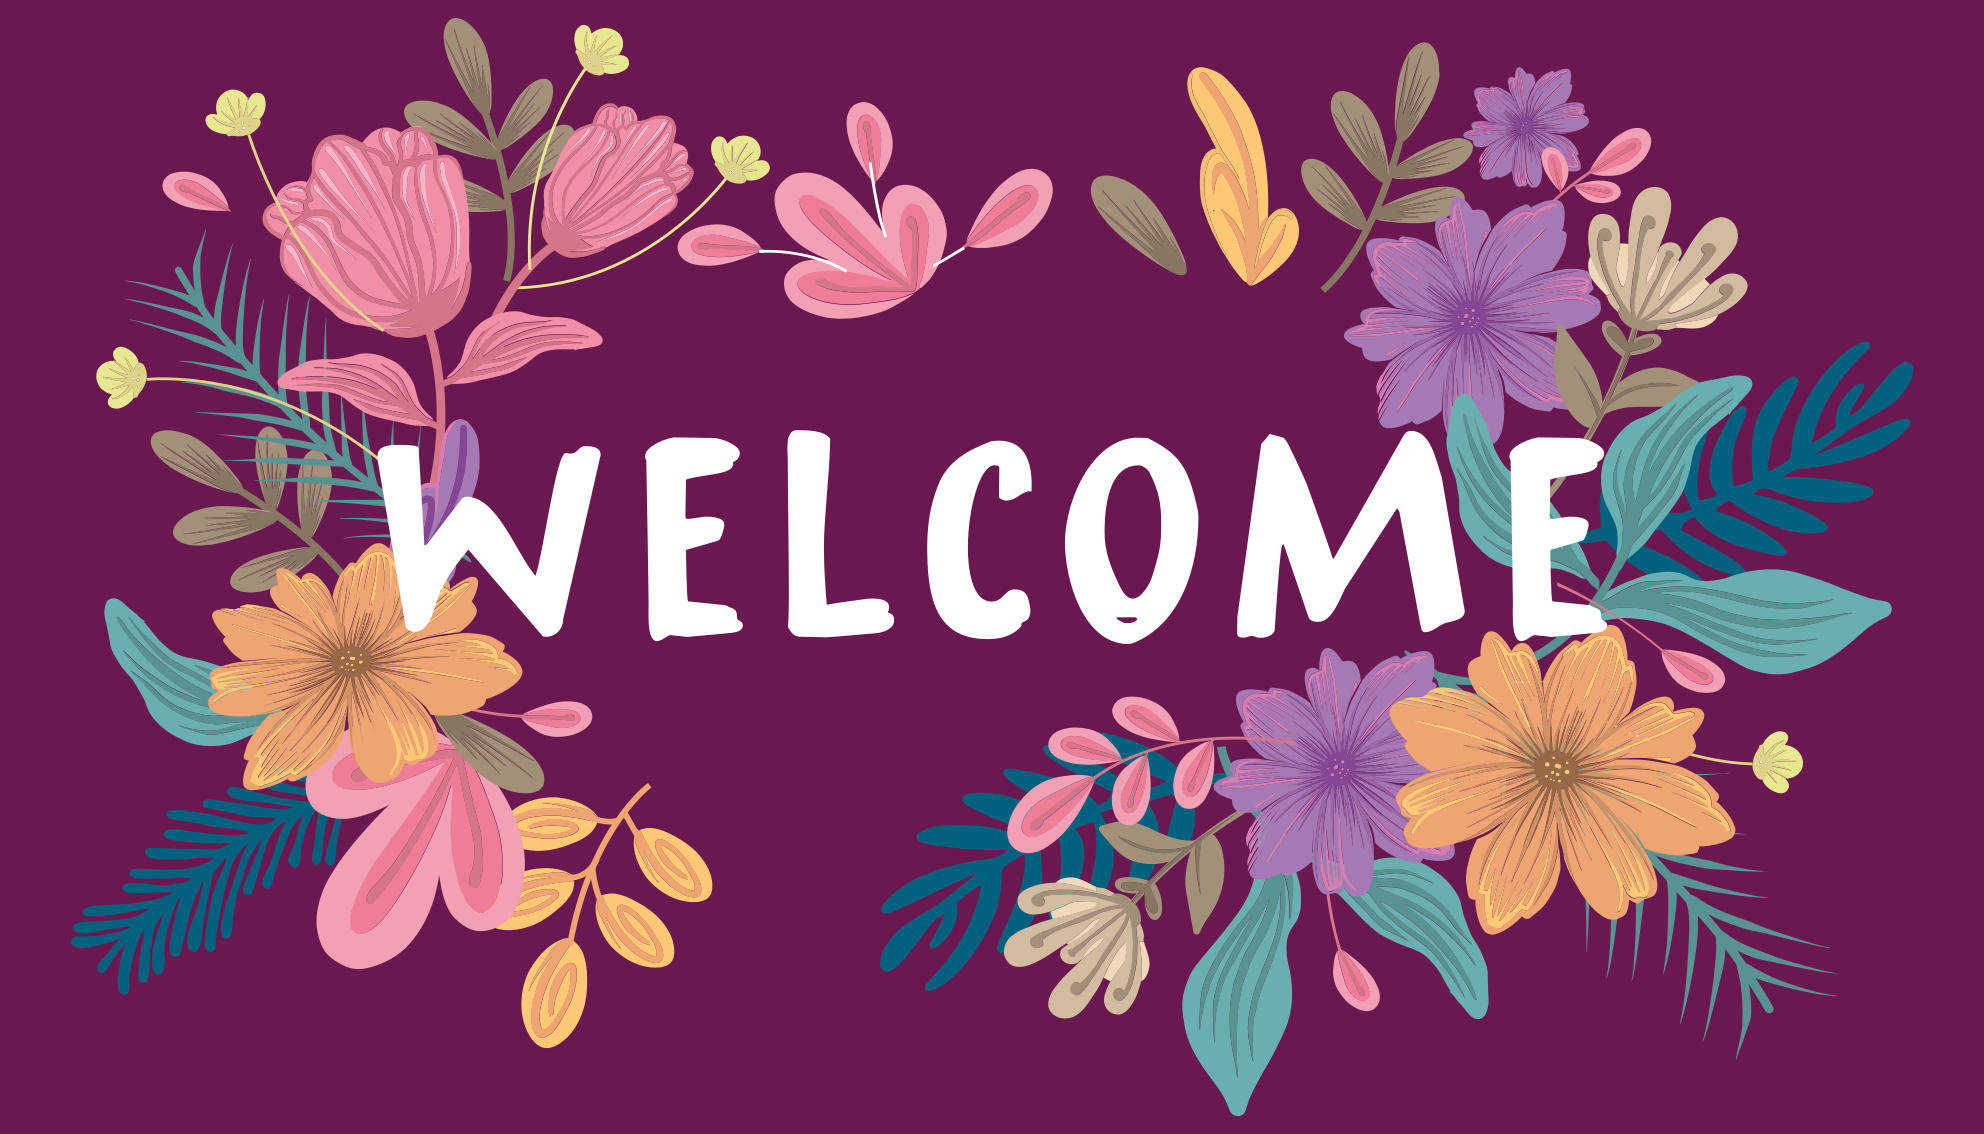 Welcome Photos Download The BEST Free Welcome Stock Photos  HD Images